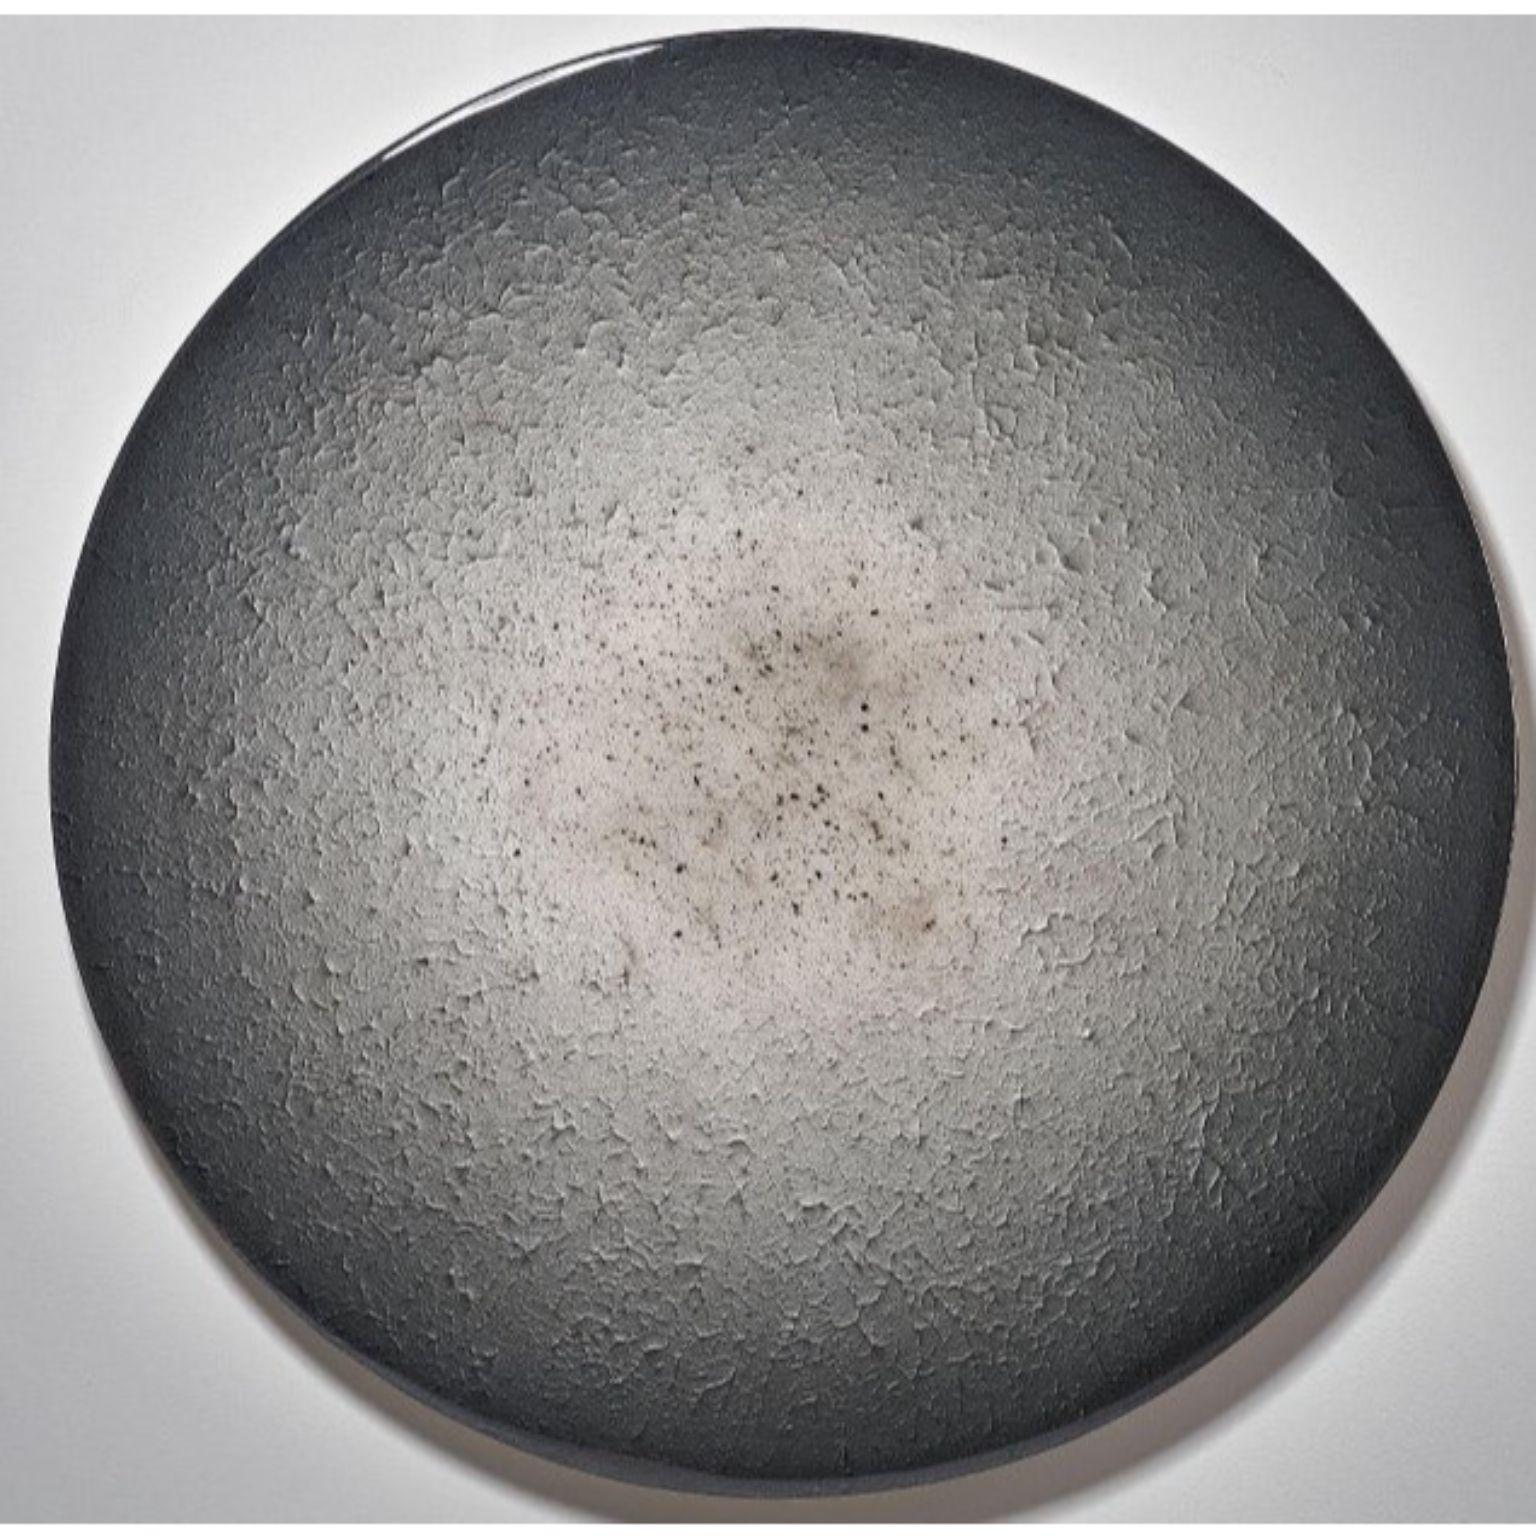 Ash minimalistic round by Corine Vanvoorbergen
Dimensions: diameter 180 cm
Materials: Brass, wood, ash, epoxy and acrylics

 ‘Ash’ symbolizes the outcome, almost like a relic of the intense passion that came before. This is never the end, as